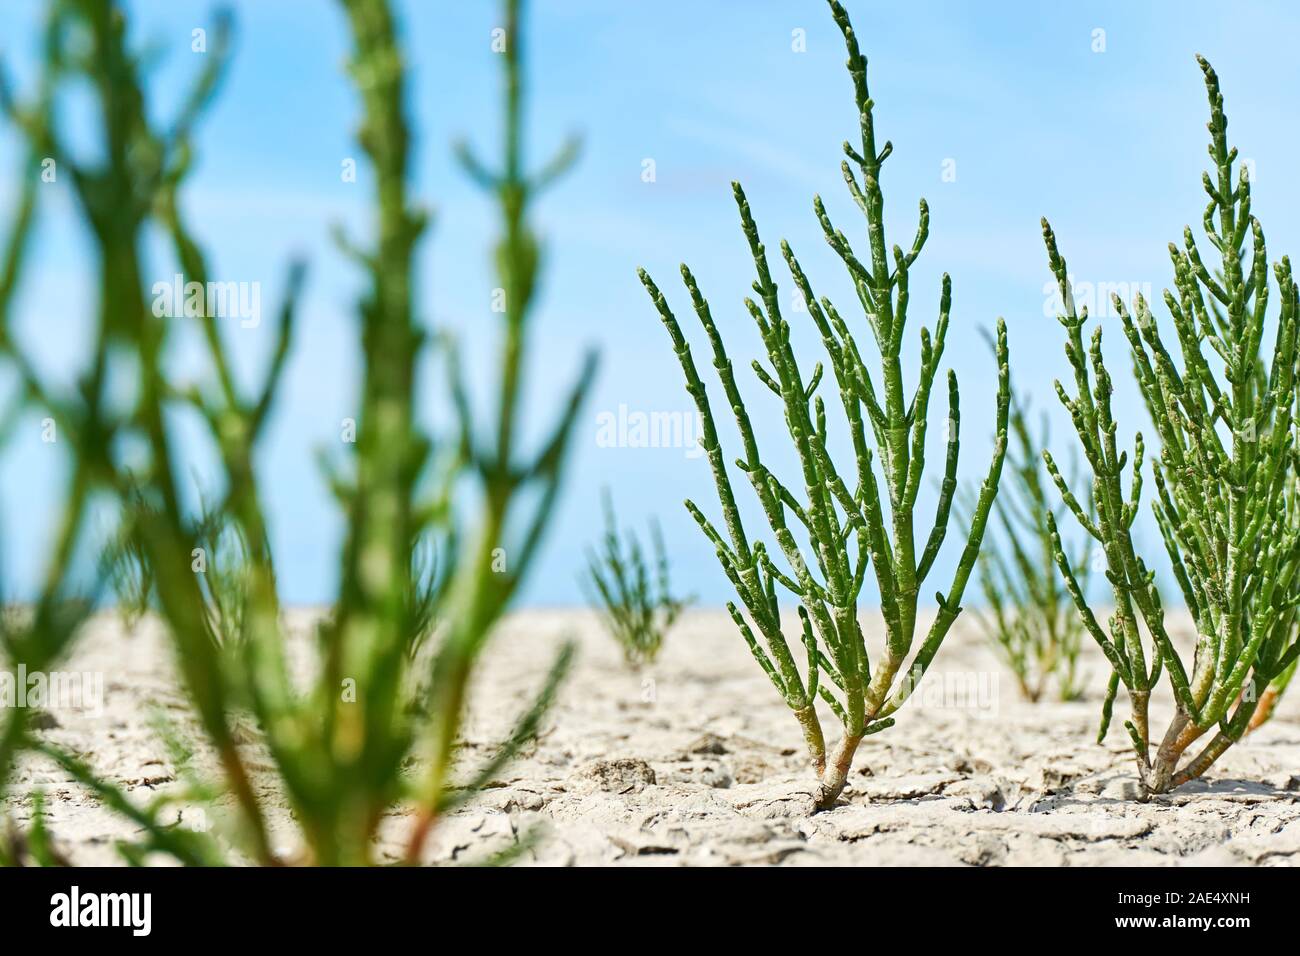 Green samphire or salicornia plants in cracked tan coloured clay at the seashore of the Wadden Sea The Netherlands at low tide under a blue sky. Stock Photo